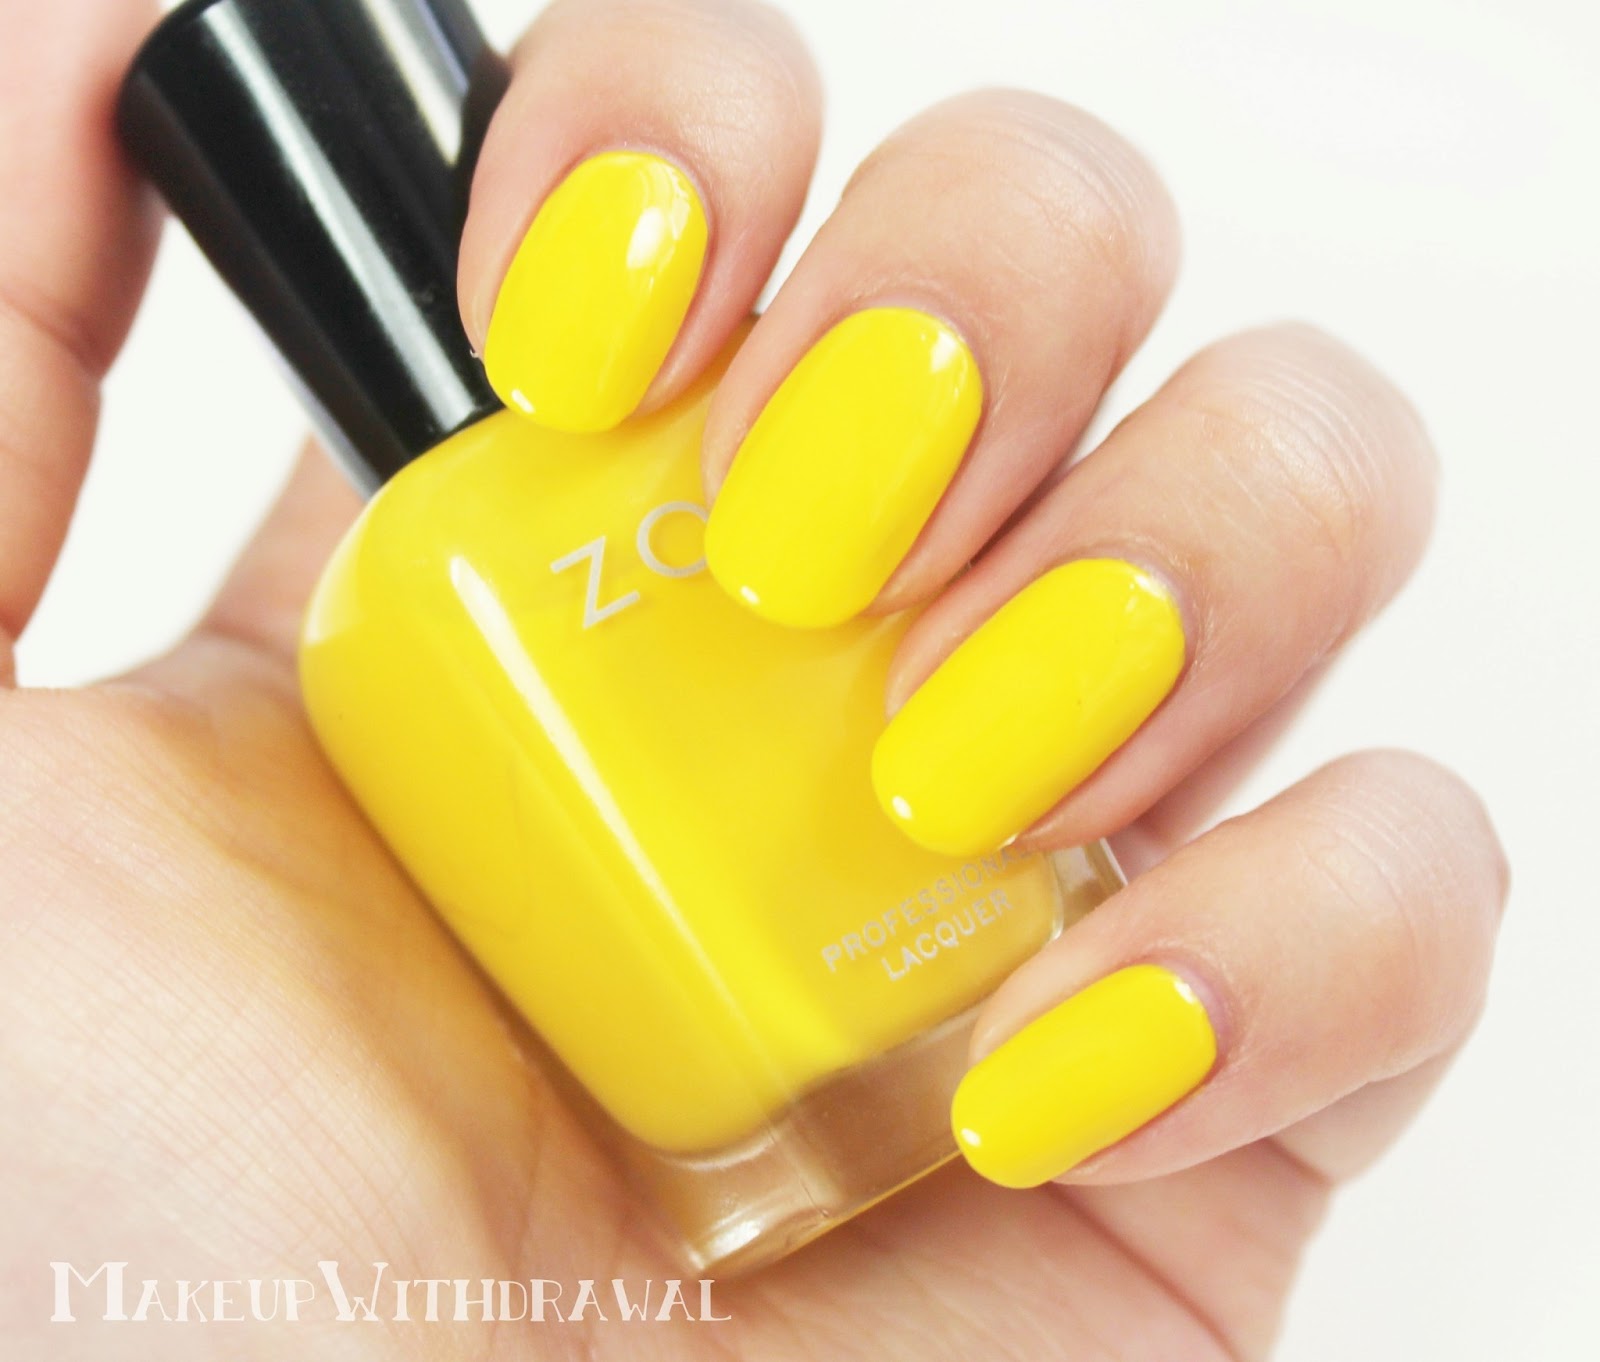 Right on the Nail: Zoya Summer 2013 Bubbly Collection Reviews and Swatches